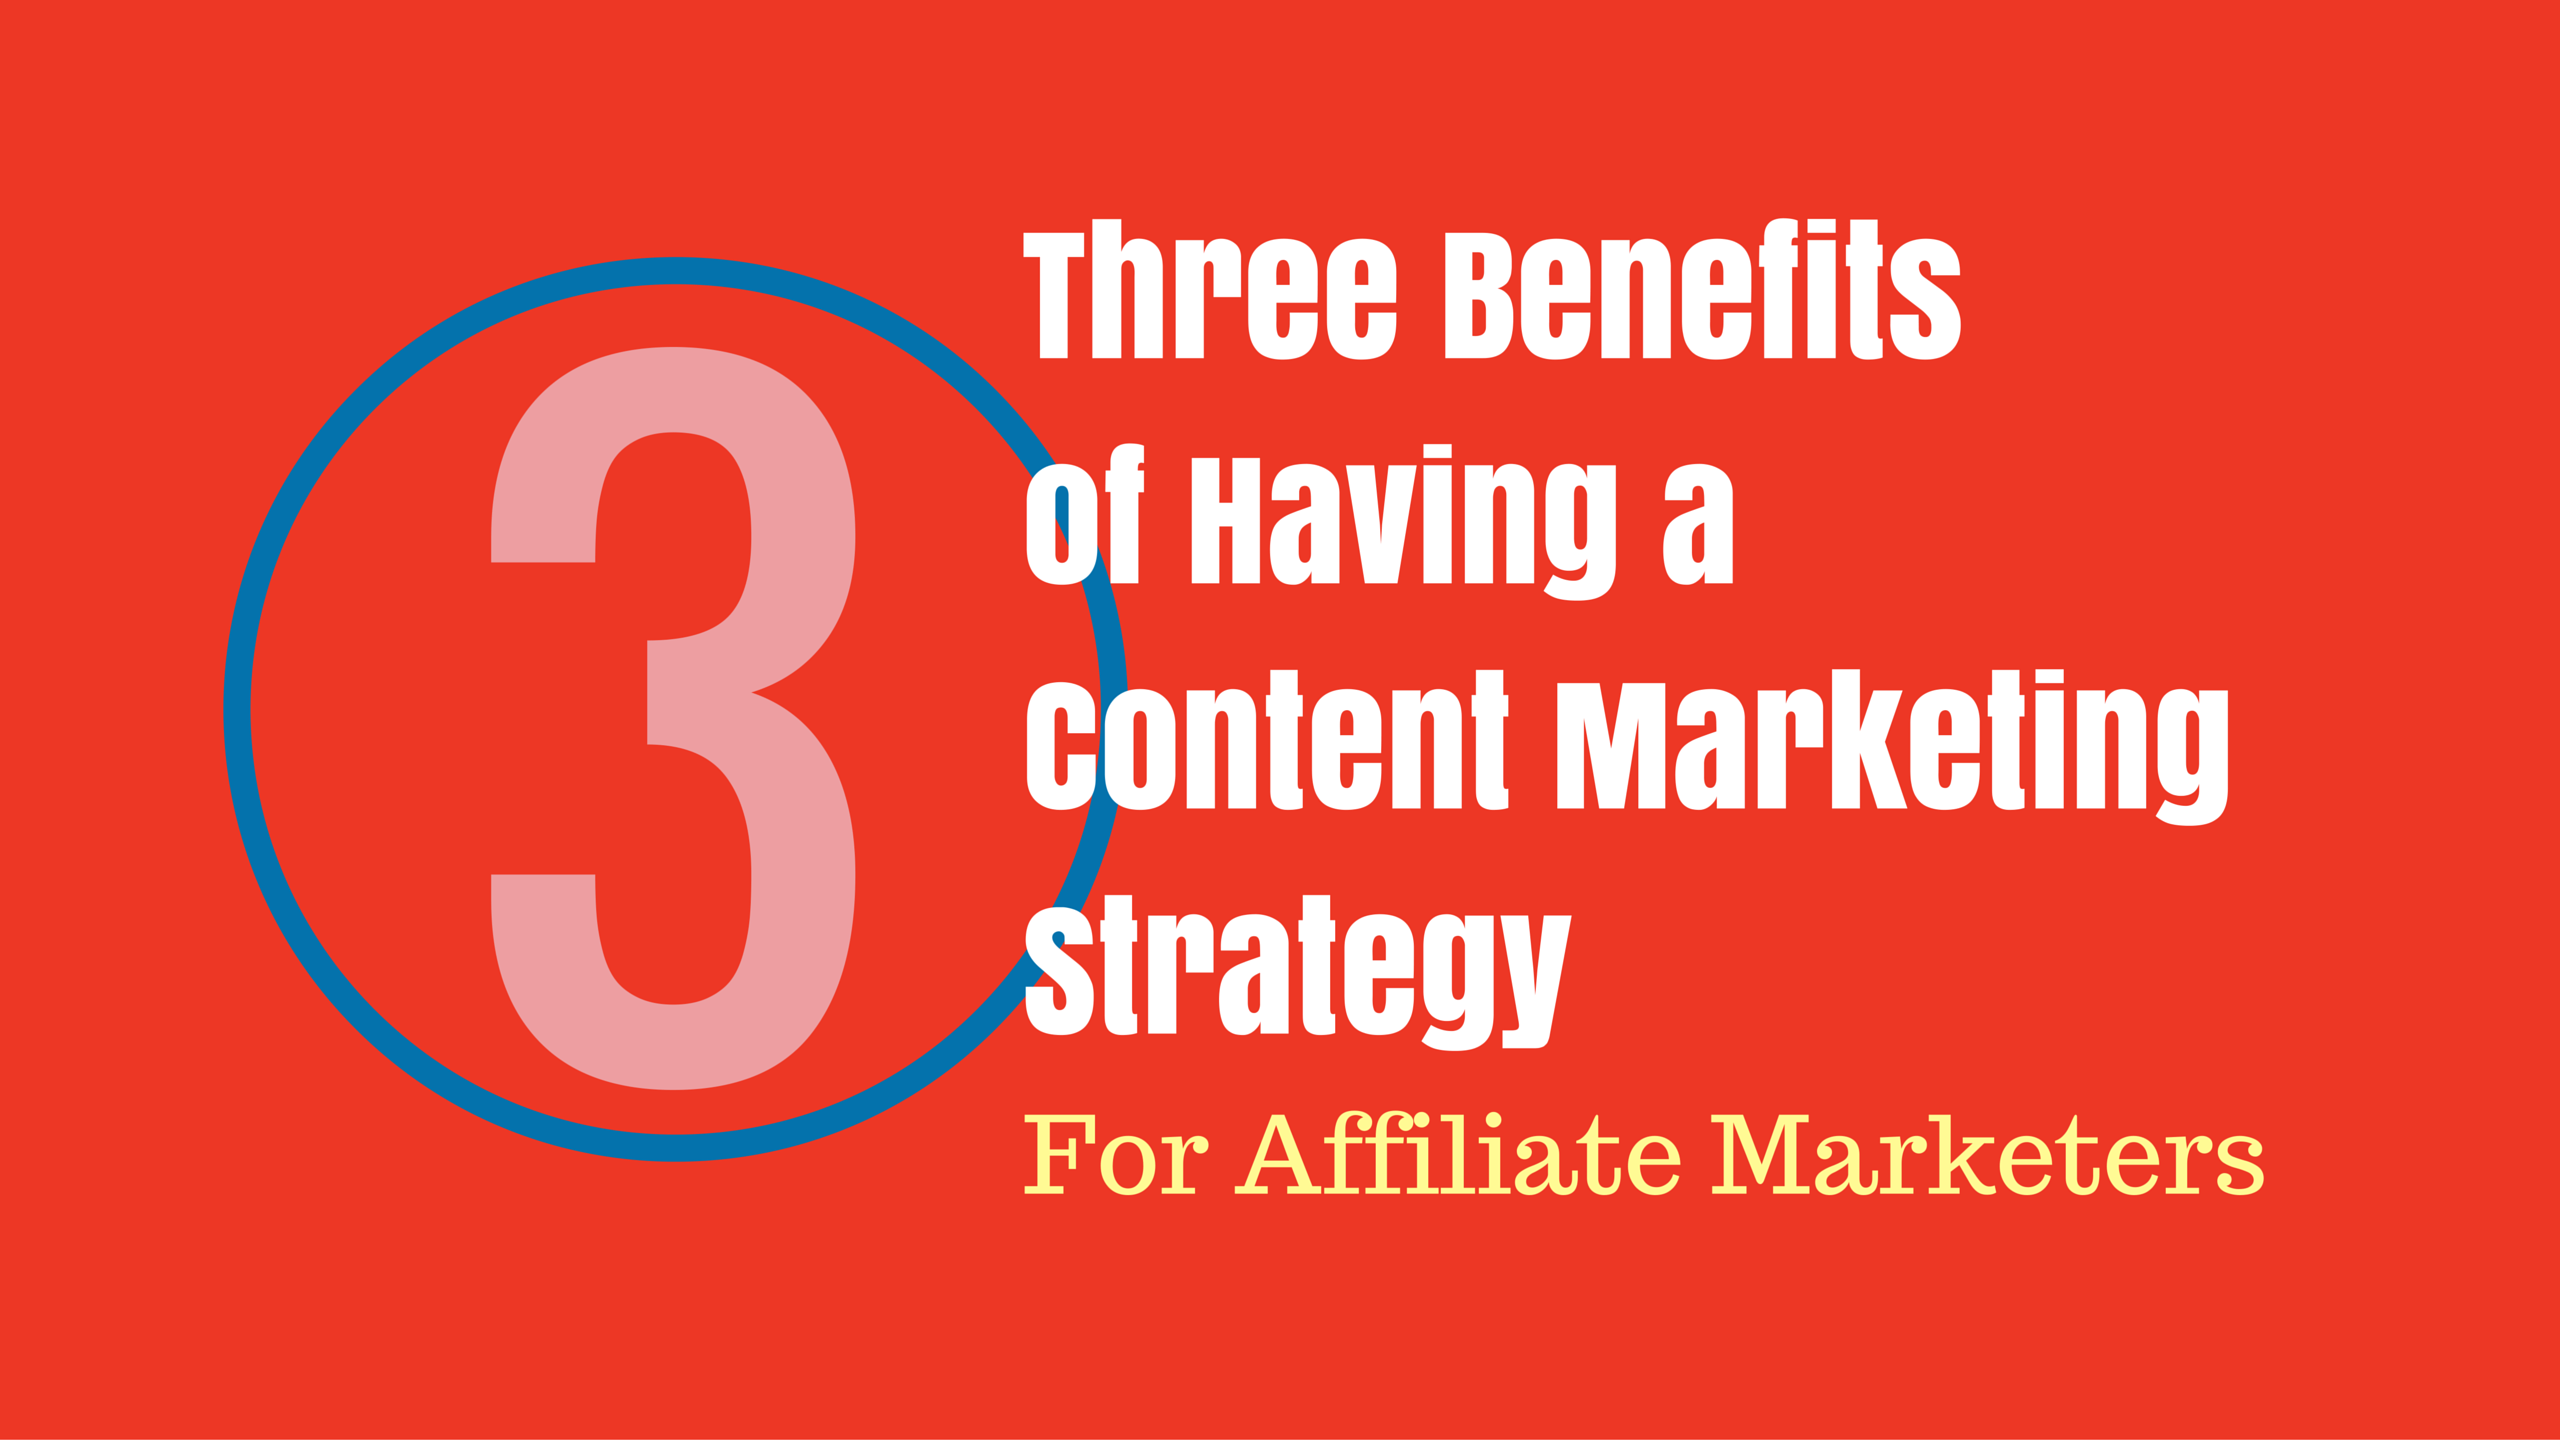 Three Benefits of a Content Marketing Strategy